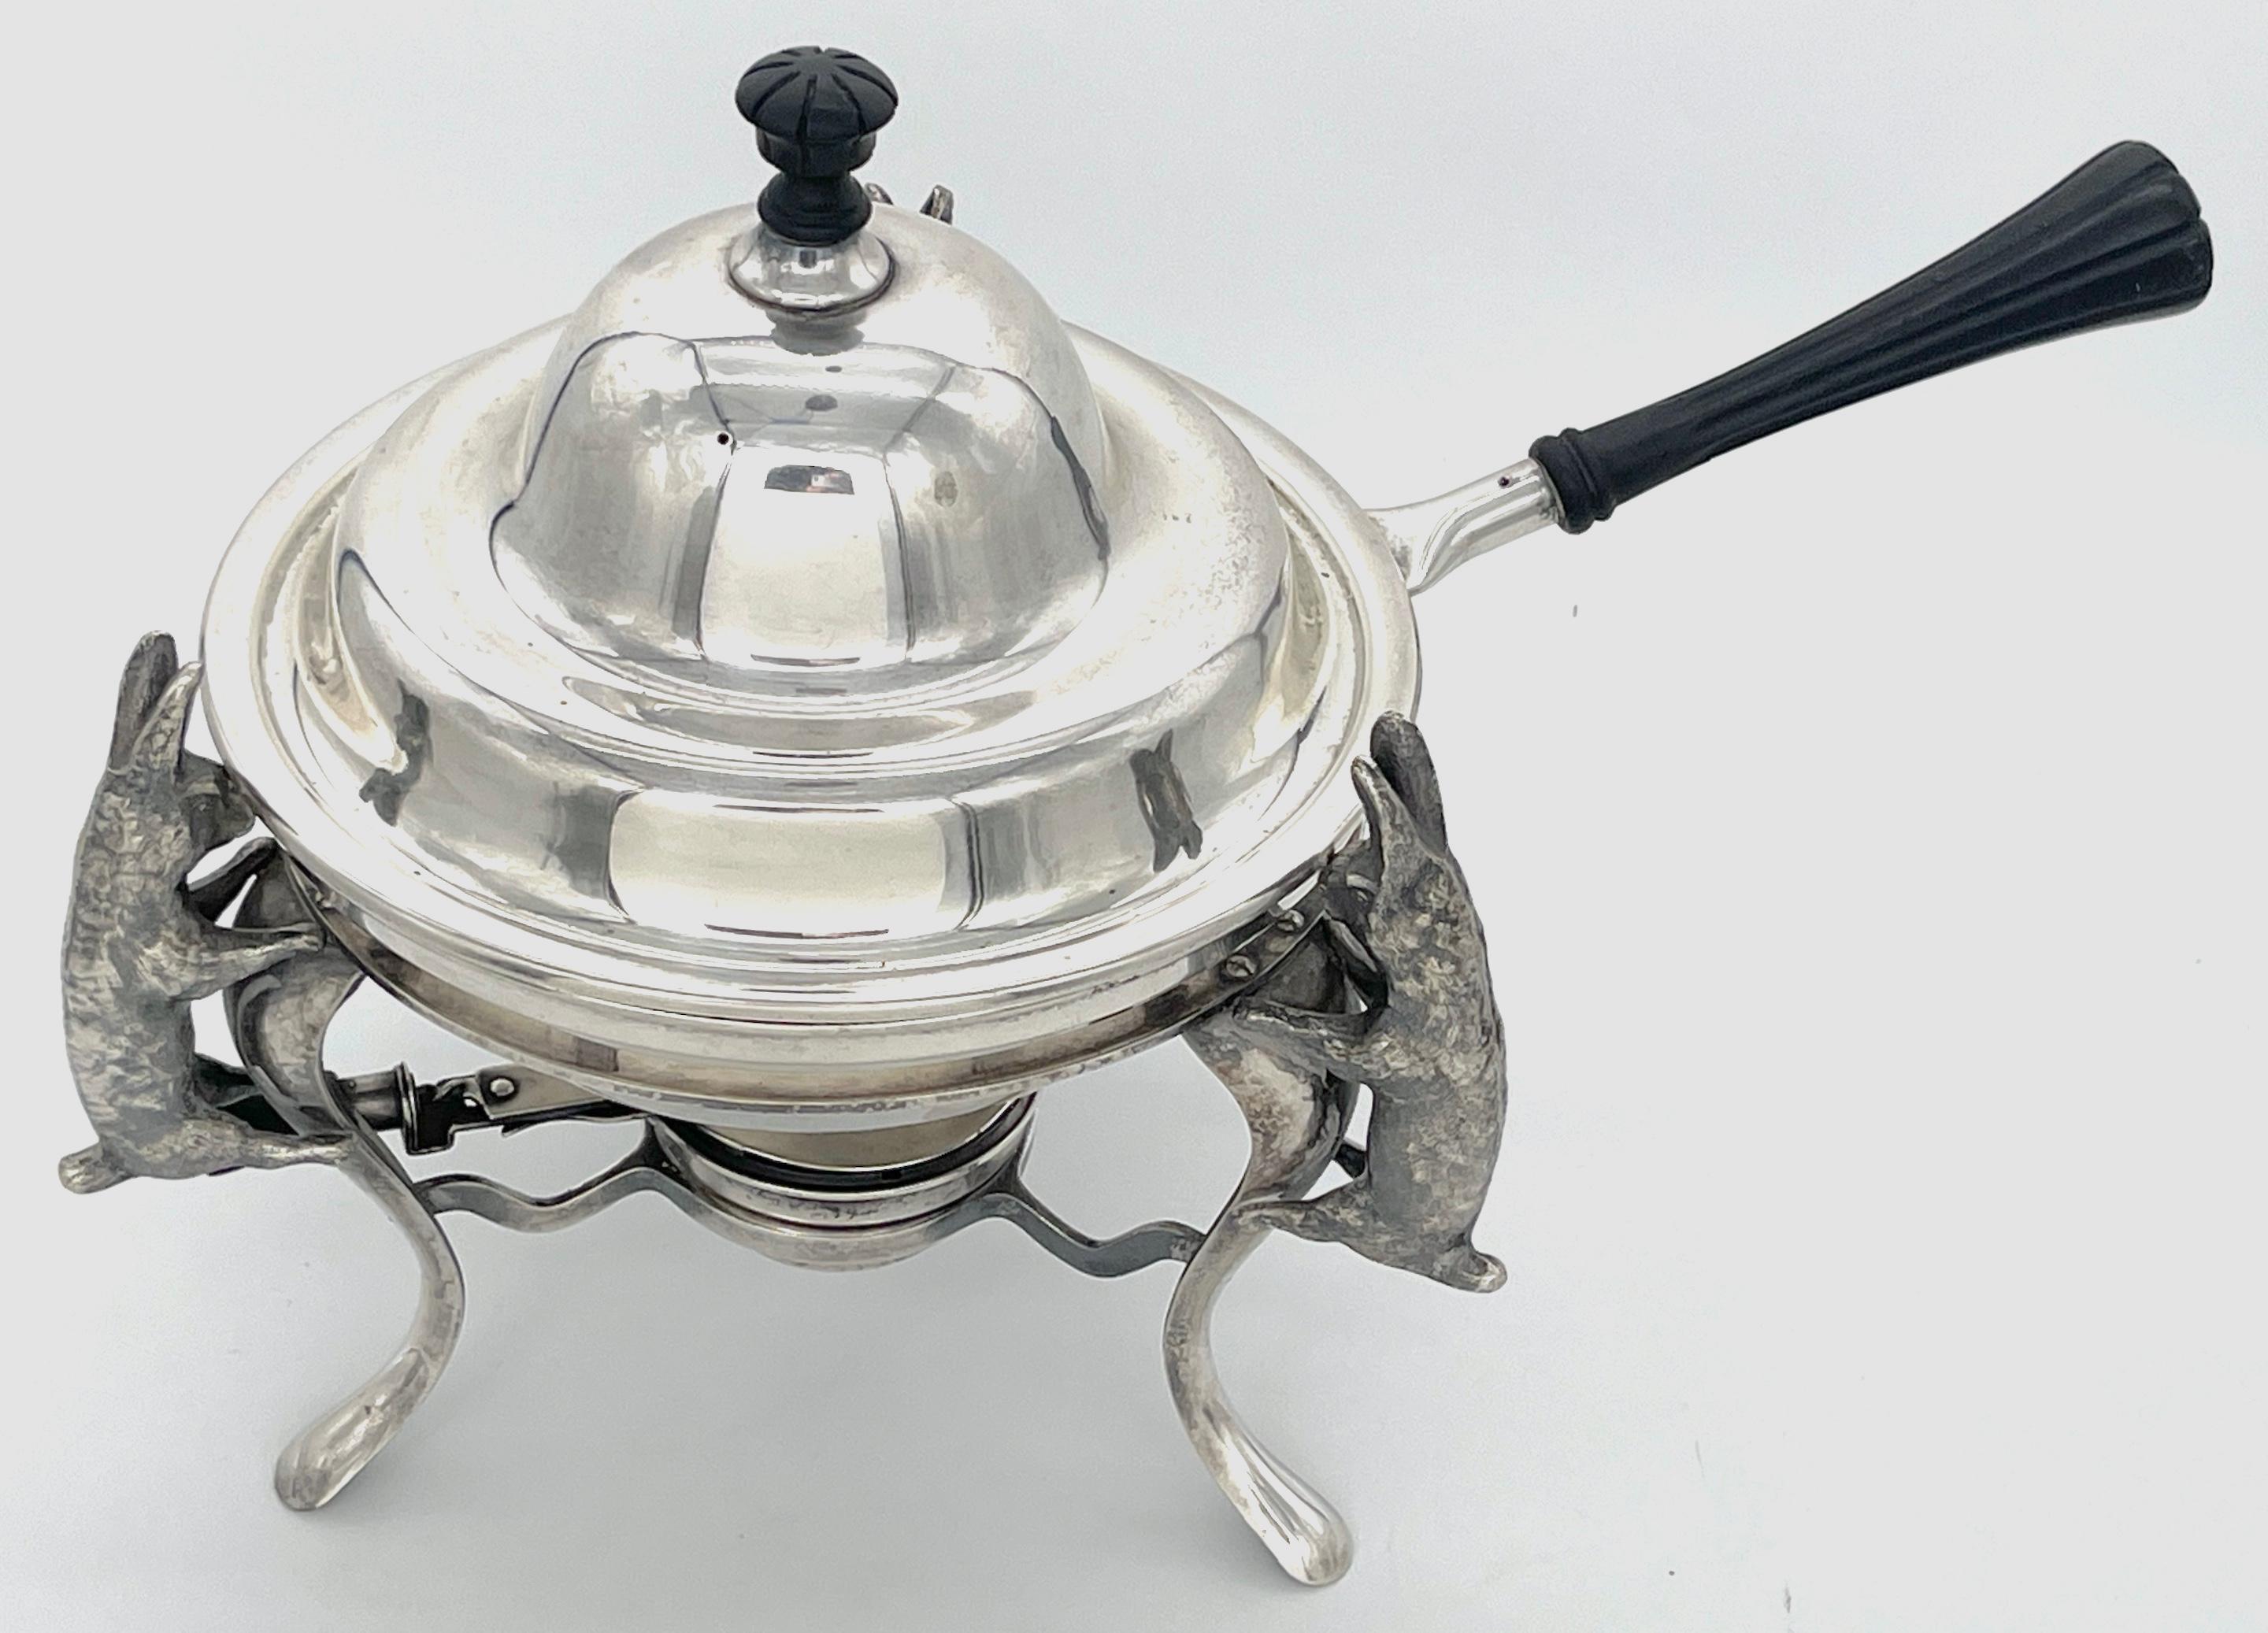 Joseph Heinrichs Silverplated & Ebony 3-D Rabbit Chafing Dish, Circa 1904
A remarkable Joseph Heinrichs Silverplated & Ebony Three dimensional  Rabbit Chafing Dish, dating back to approximately 1904. This iconic piece highlights Joseph Heinrichs'